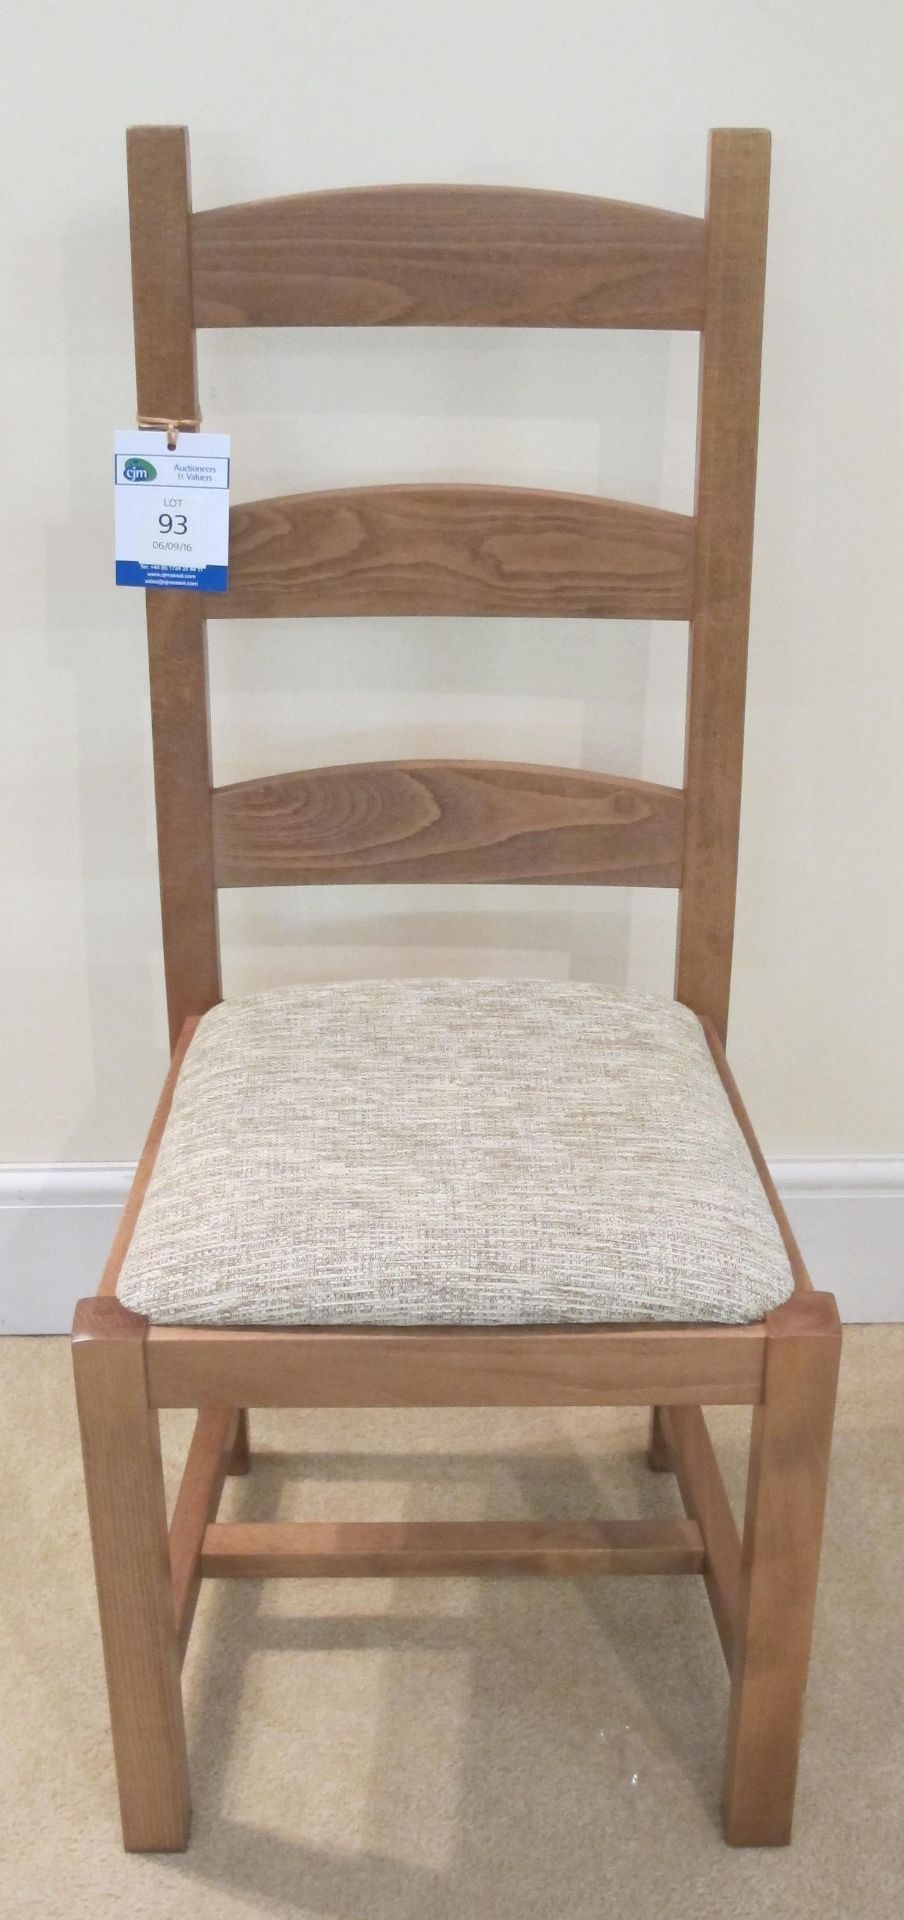 Eaves ladder back chair with olive seat pad.